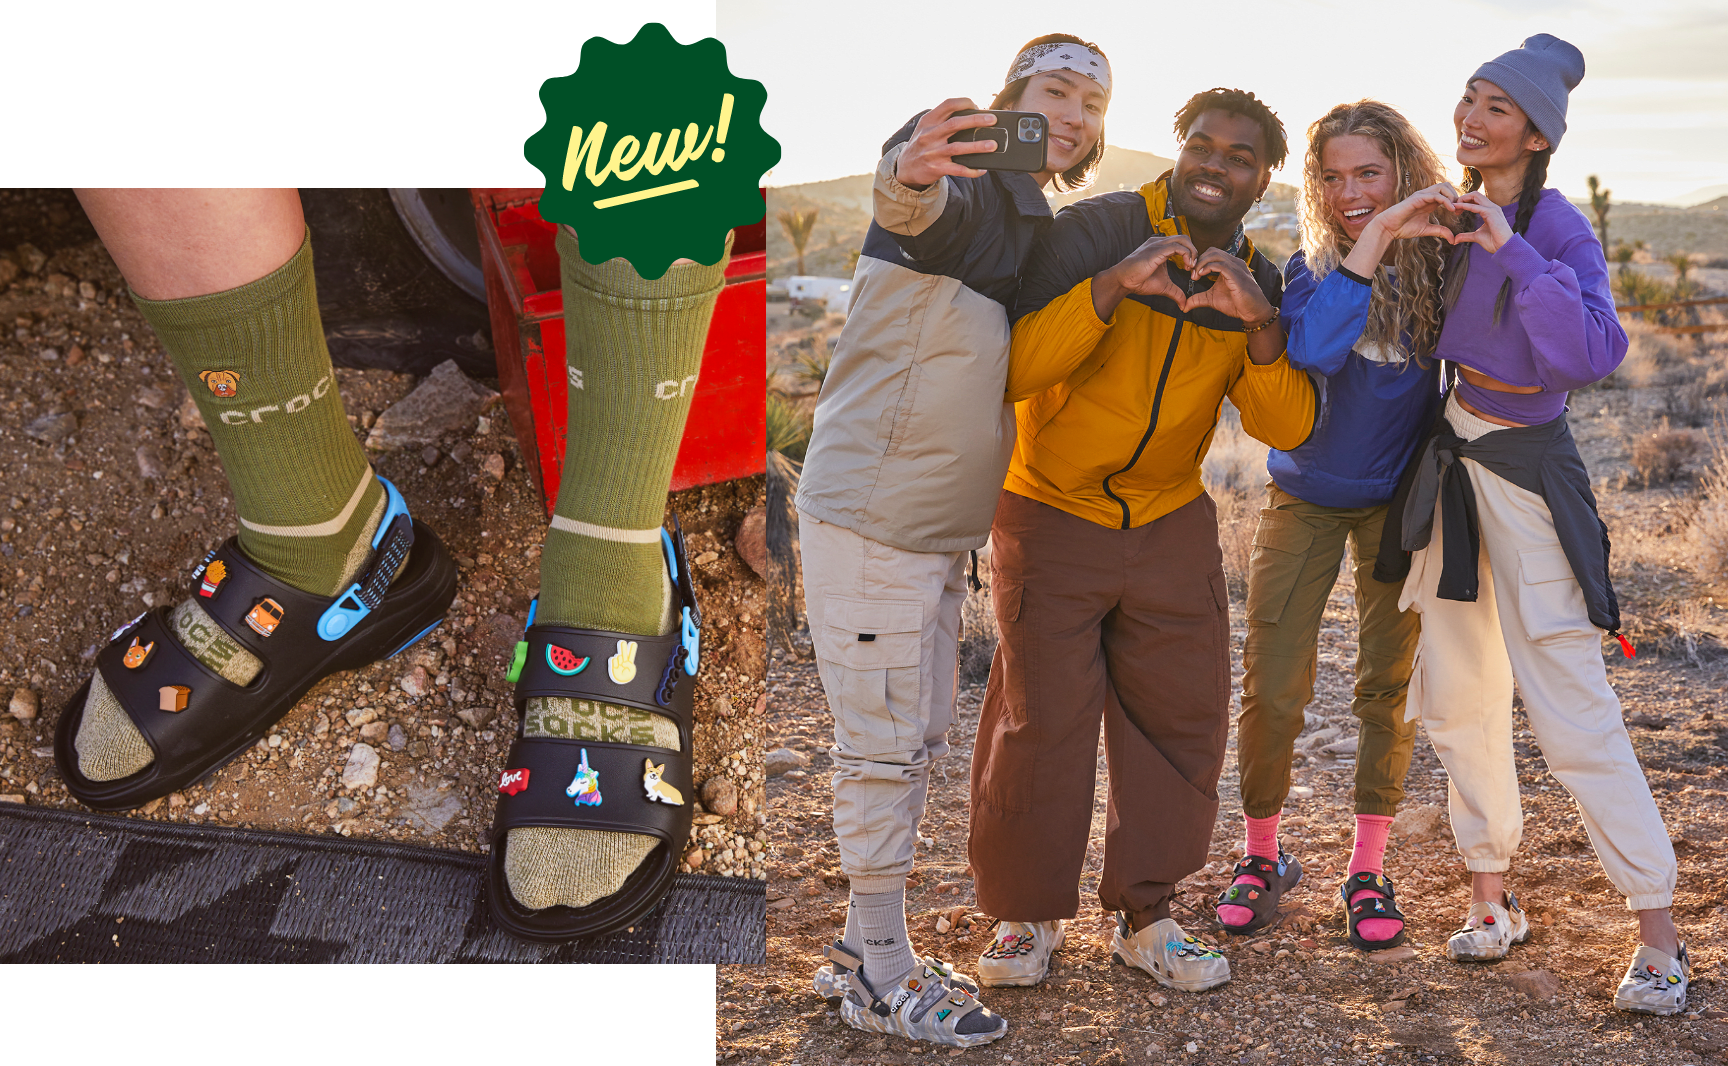 New! All-Terrain sandals with Assorted Jibbitz. Models taking selfie in the desert wearing All-Terrain Clogs and Sandals with assorted Jibbitz.